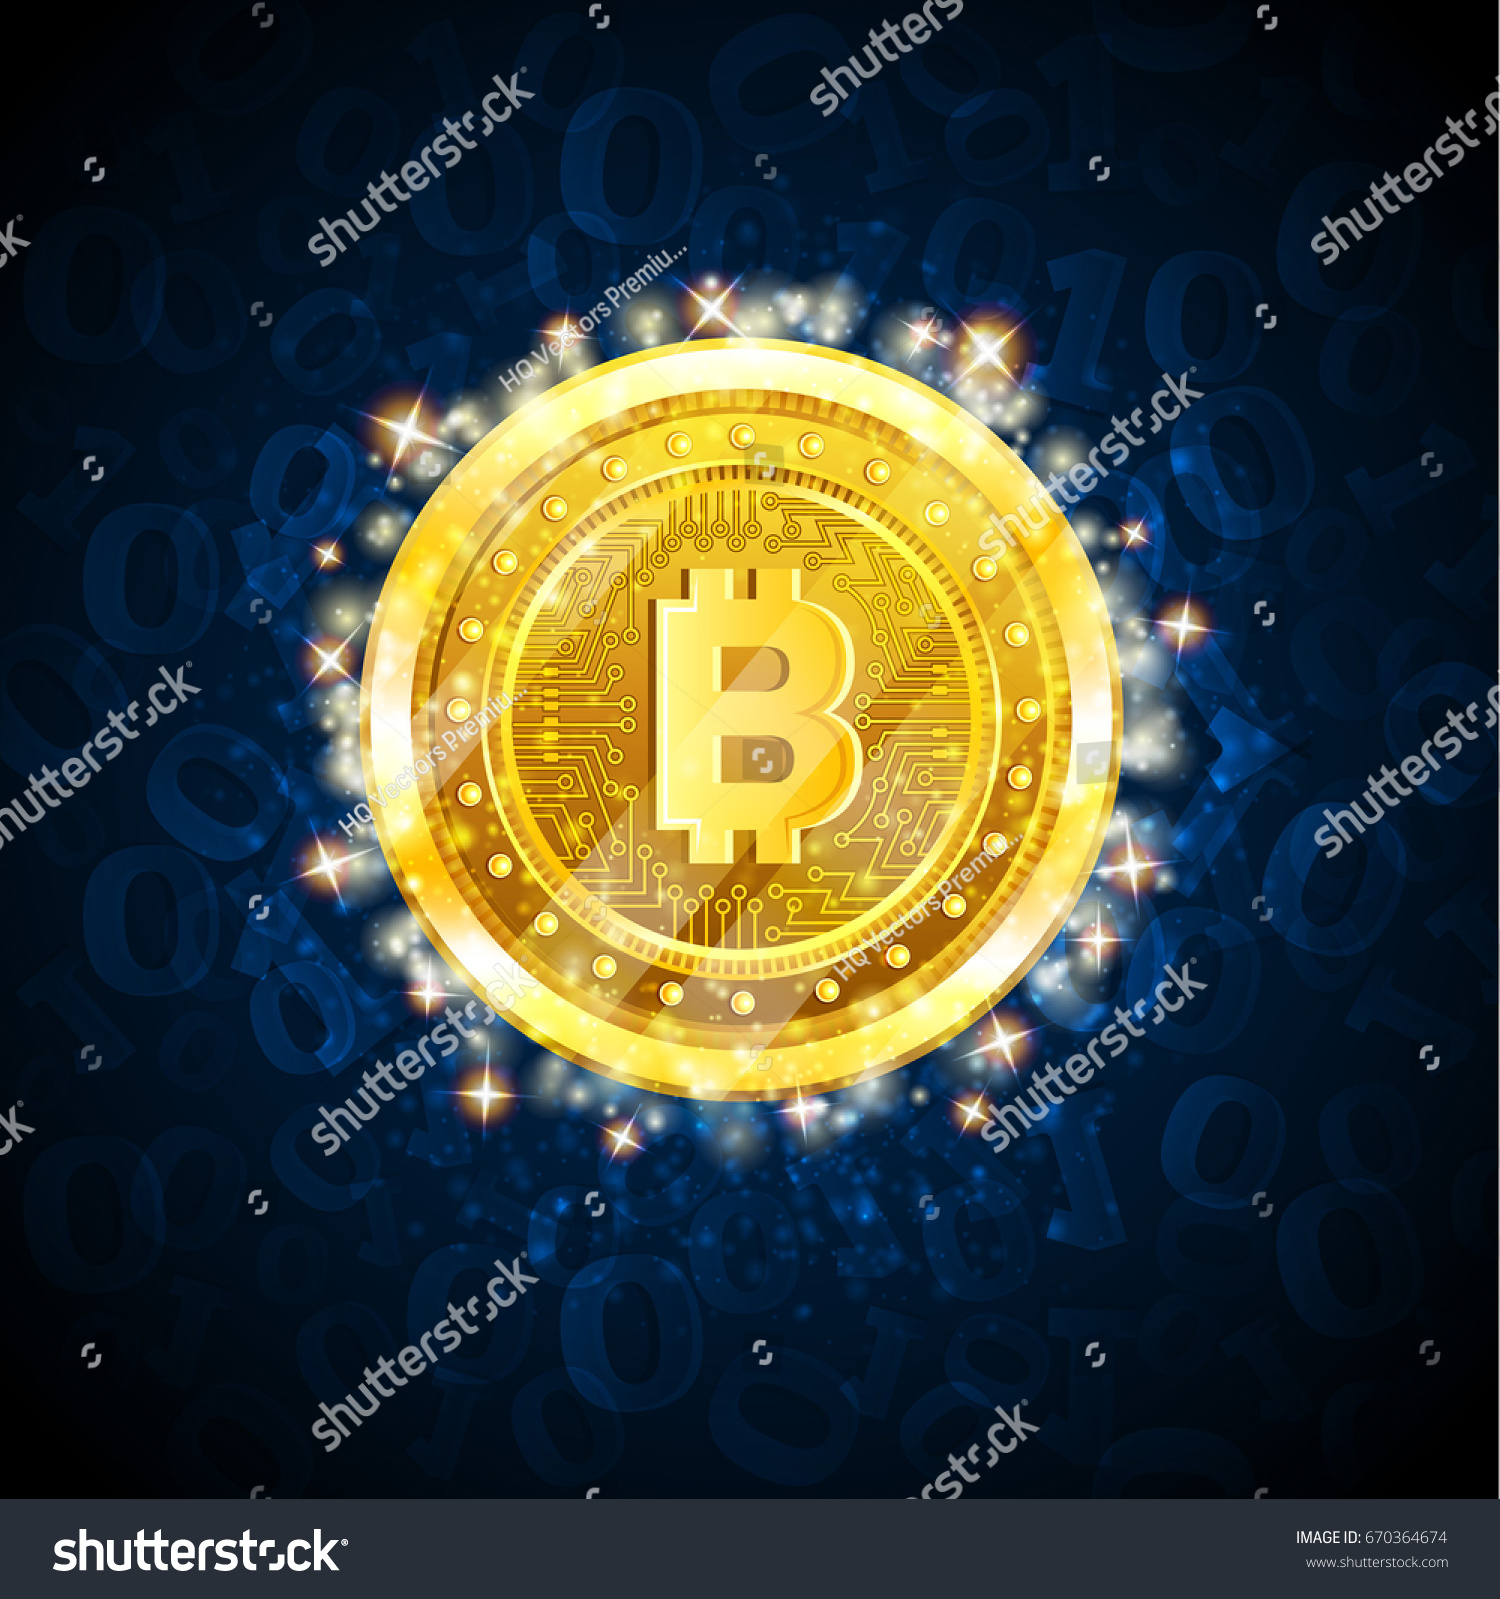 SVG of Golden bit coin in the center of blue background with binary code svg